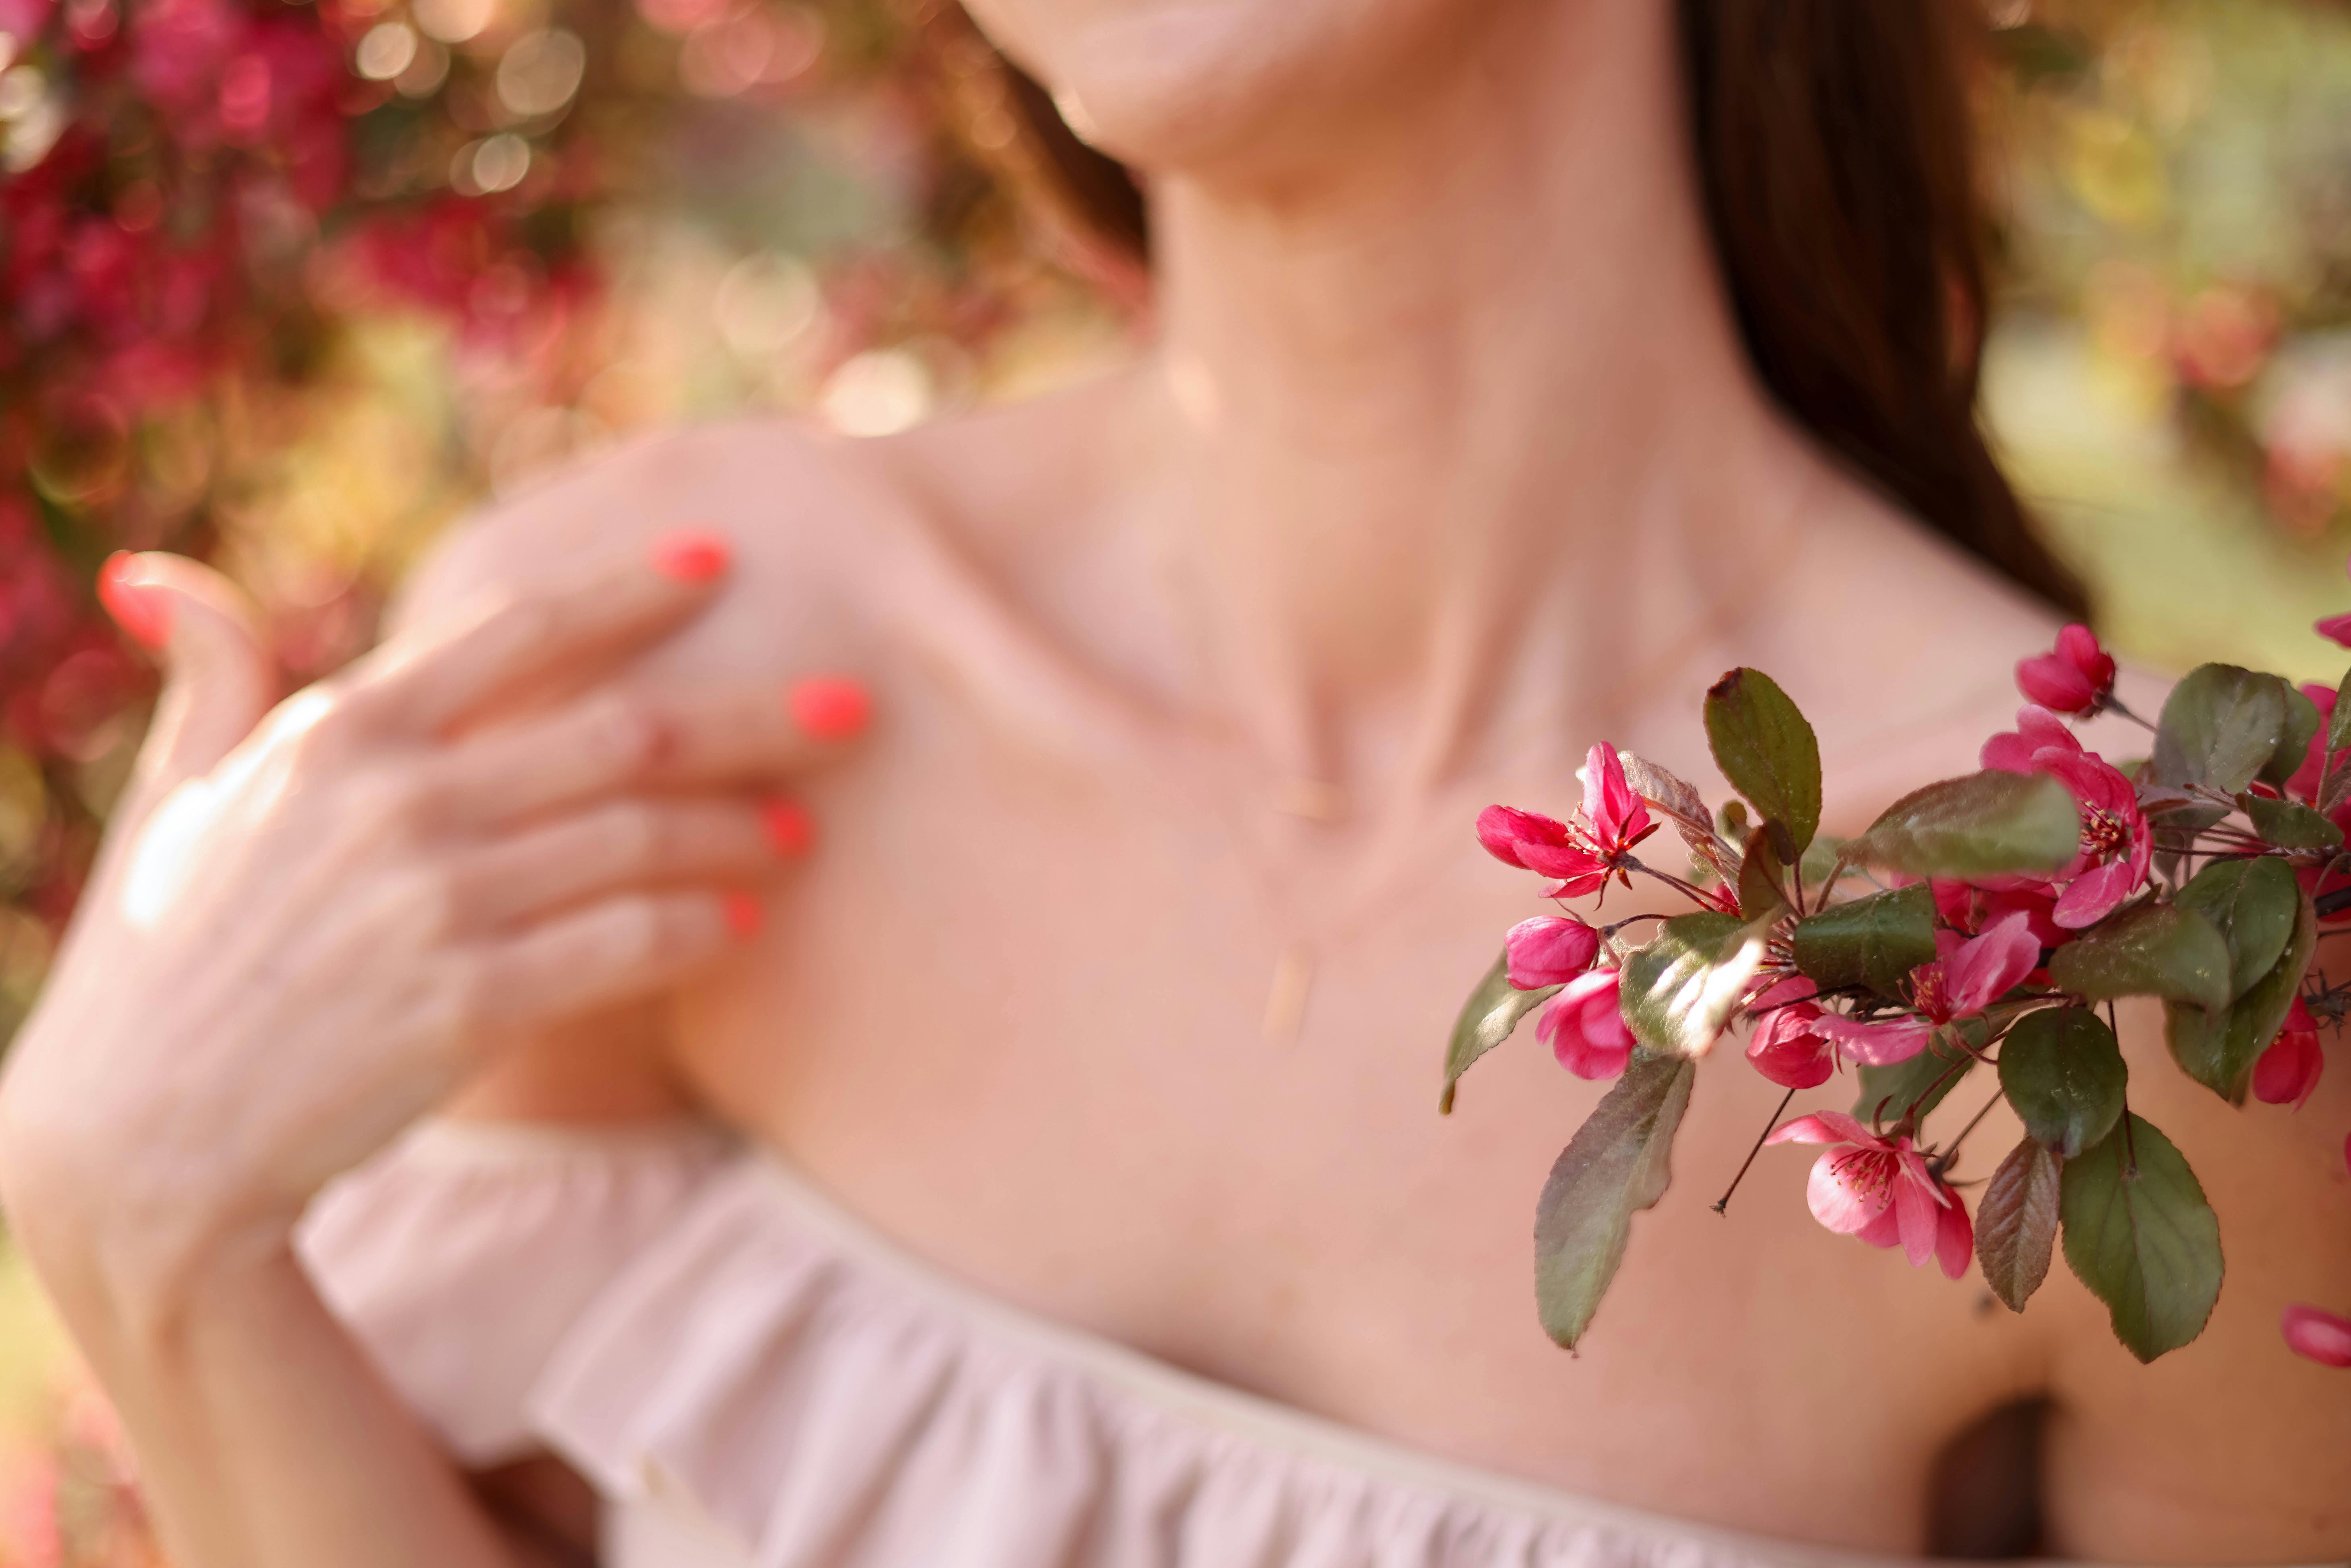 https://images.pexels.com/photos/17224887/pexels-photo-17224887/free-photo-of-woman-in-an-off-shoulder-dress-standing-between-cherry-blossom-branches.jpeg